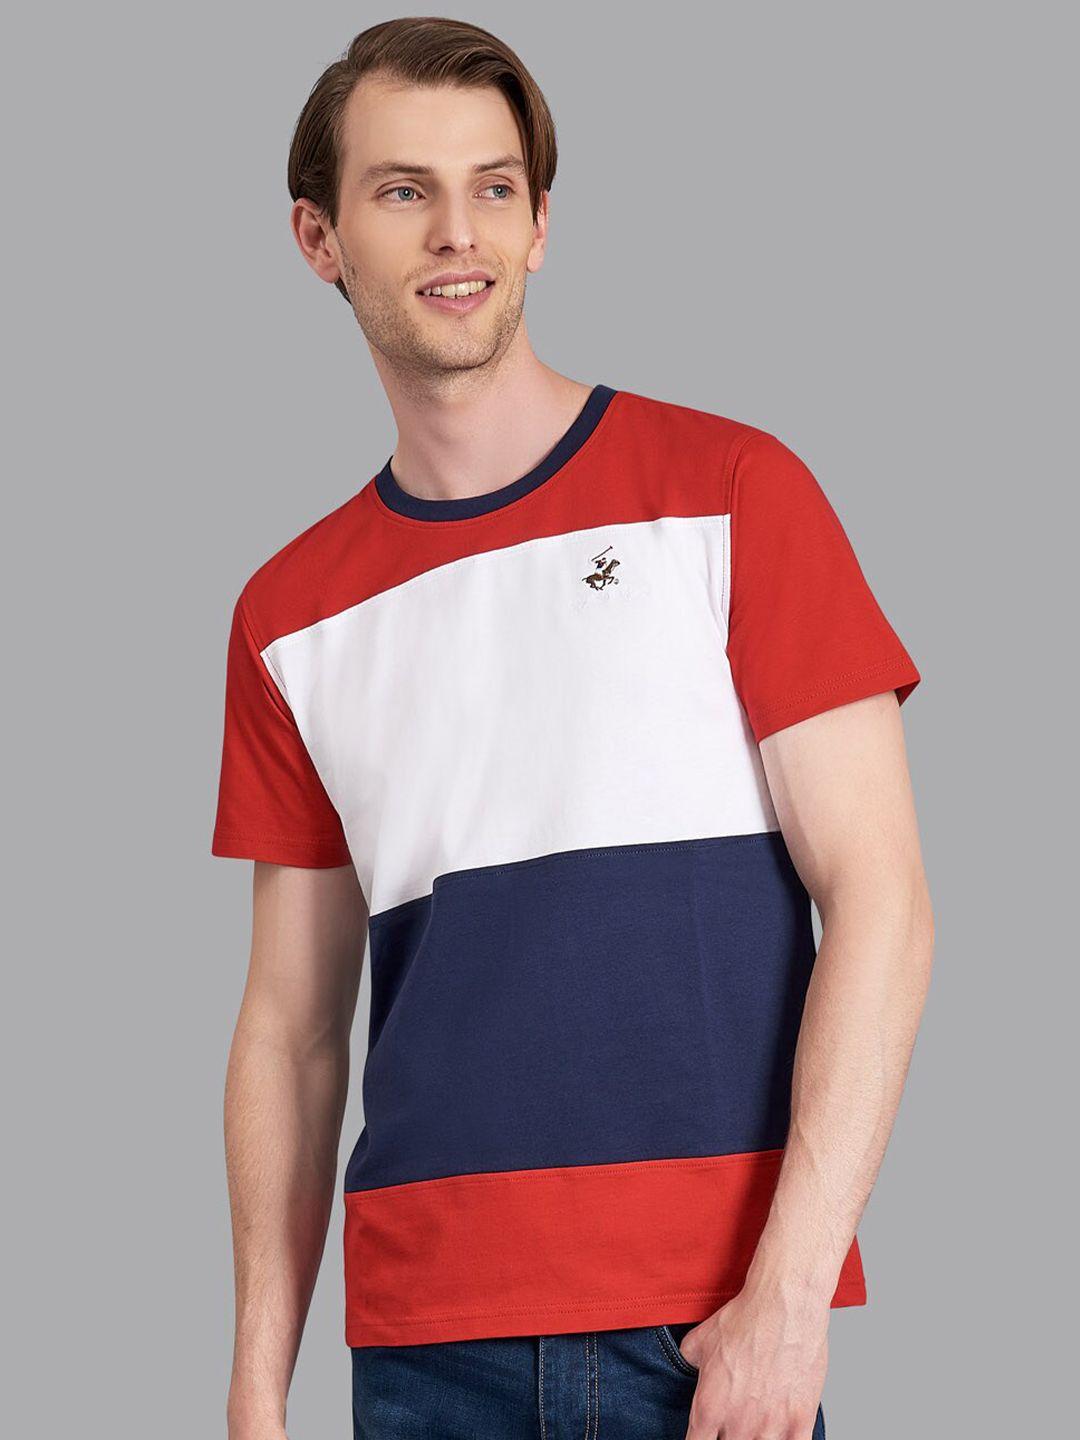 beverly hills polo club men red & white colourblocked t-shirt